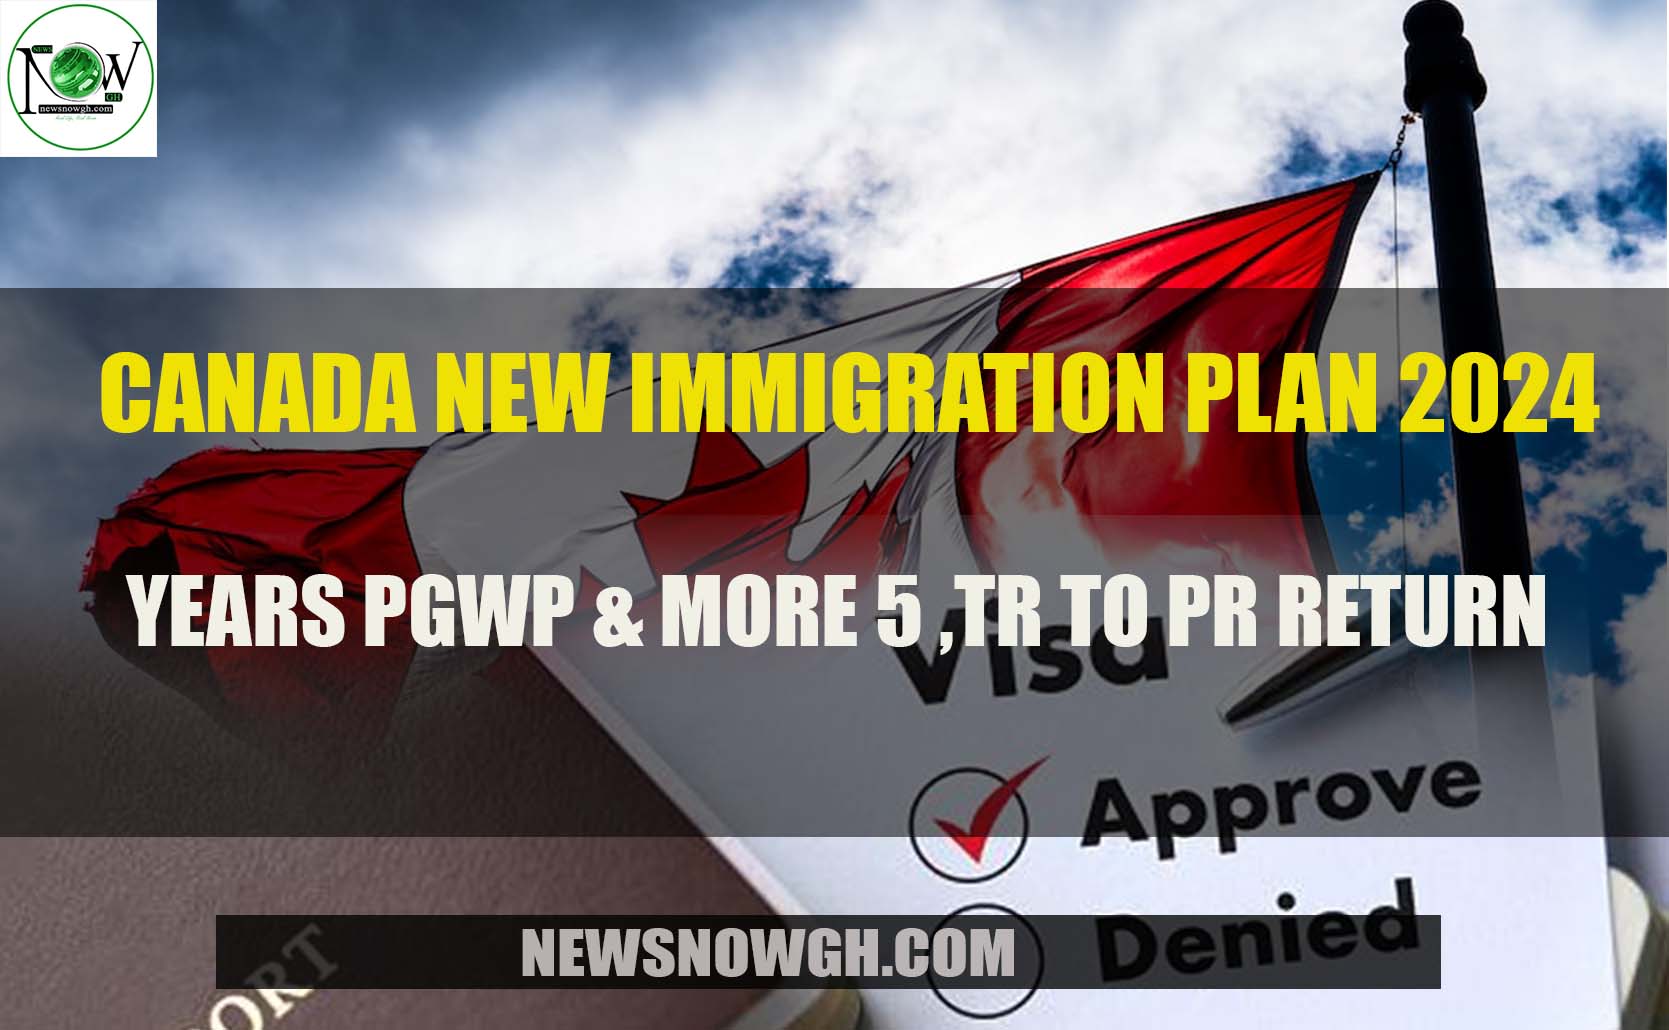 Canada Immigration Plan 2024 TR to PR Return, 5 Years PGWP